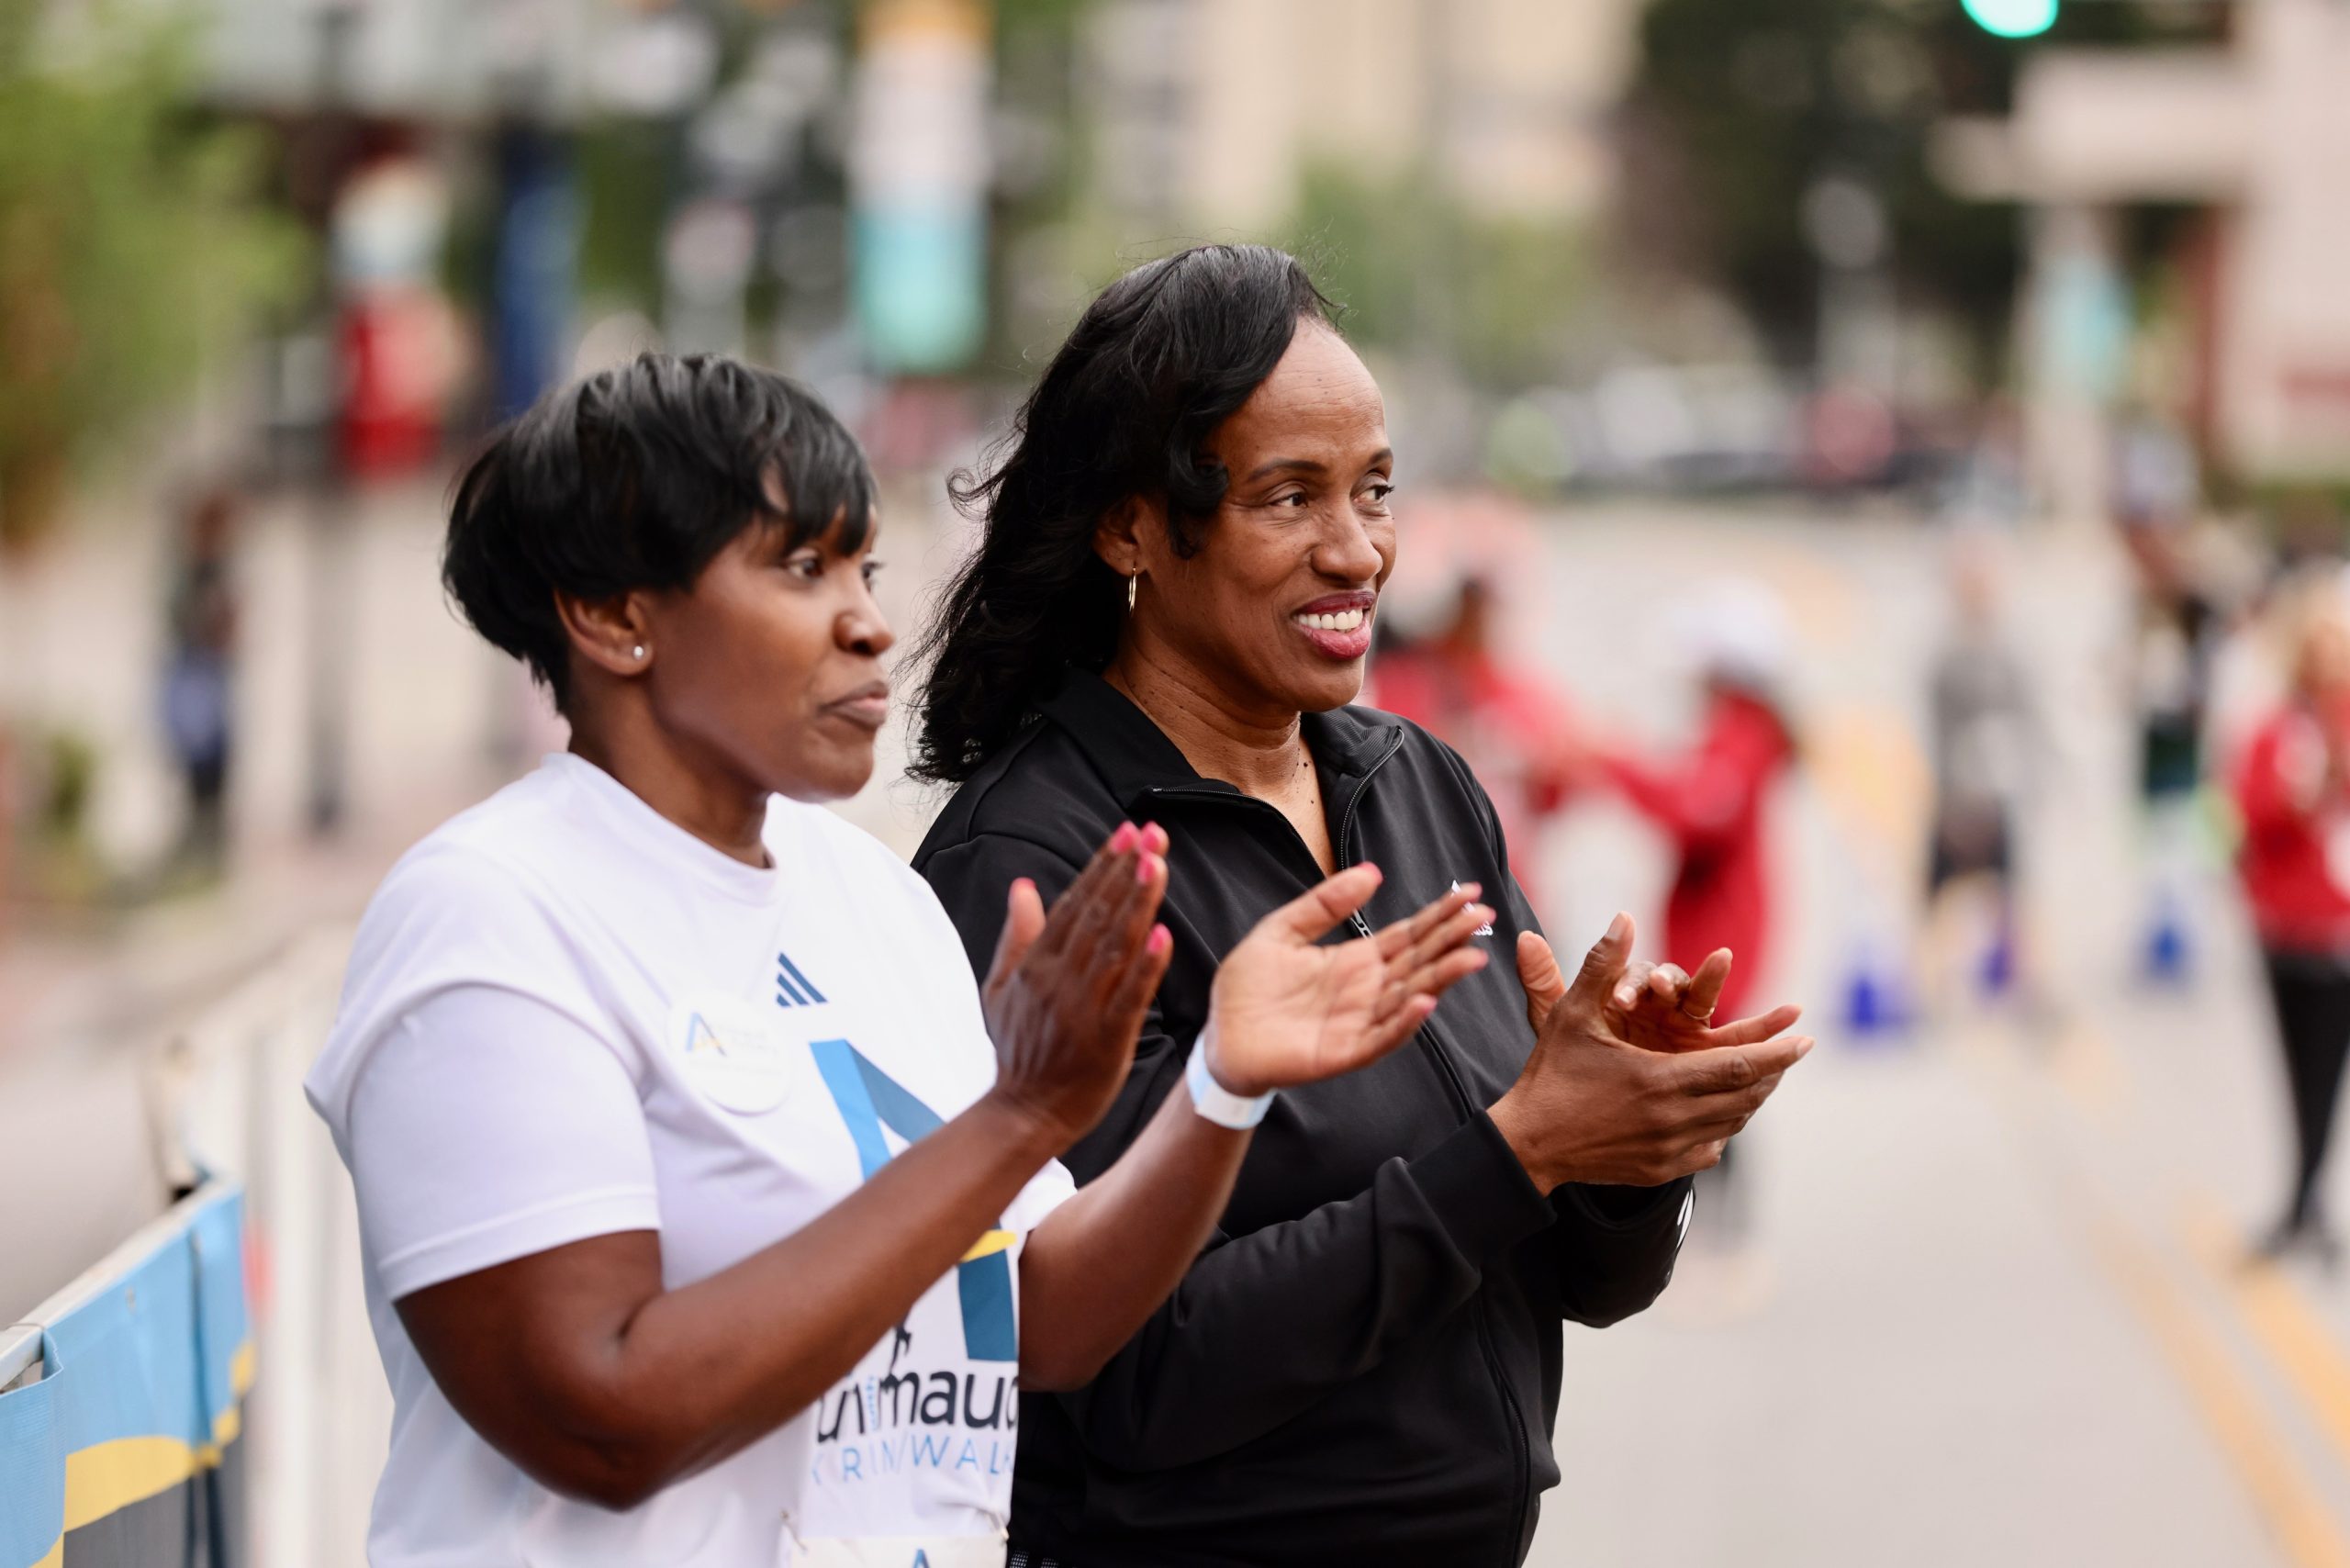 Wanda Cooper-Jones (left), the mother of Ahmaud Arbery, stands with Olympic gold medalist Jackie Joyner-Kersee at the start of the 5K.